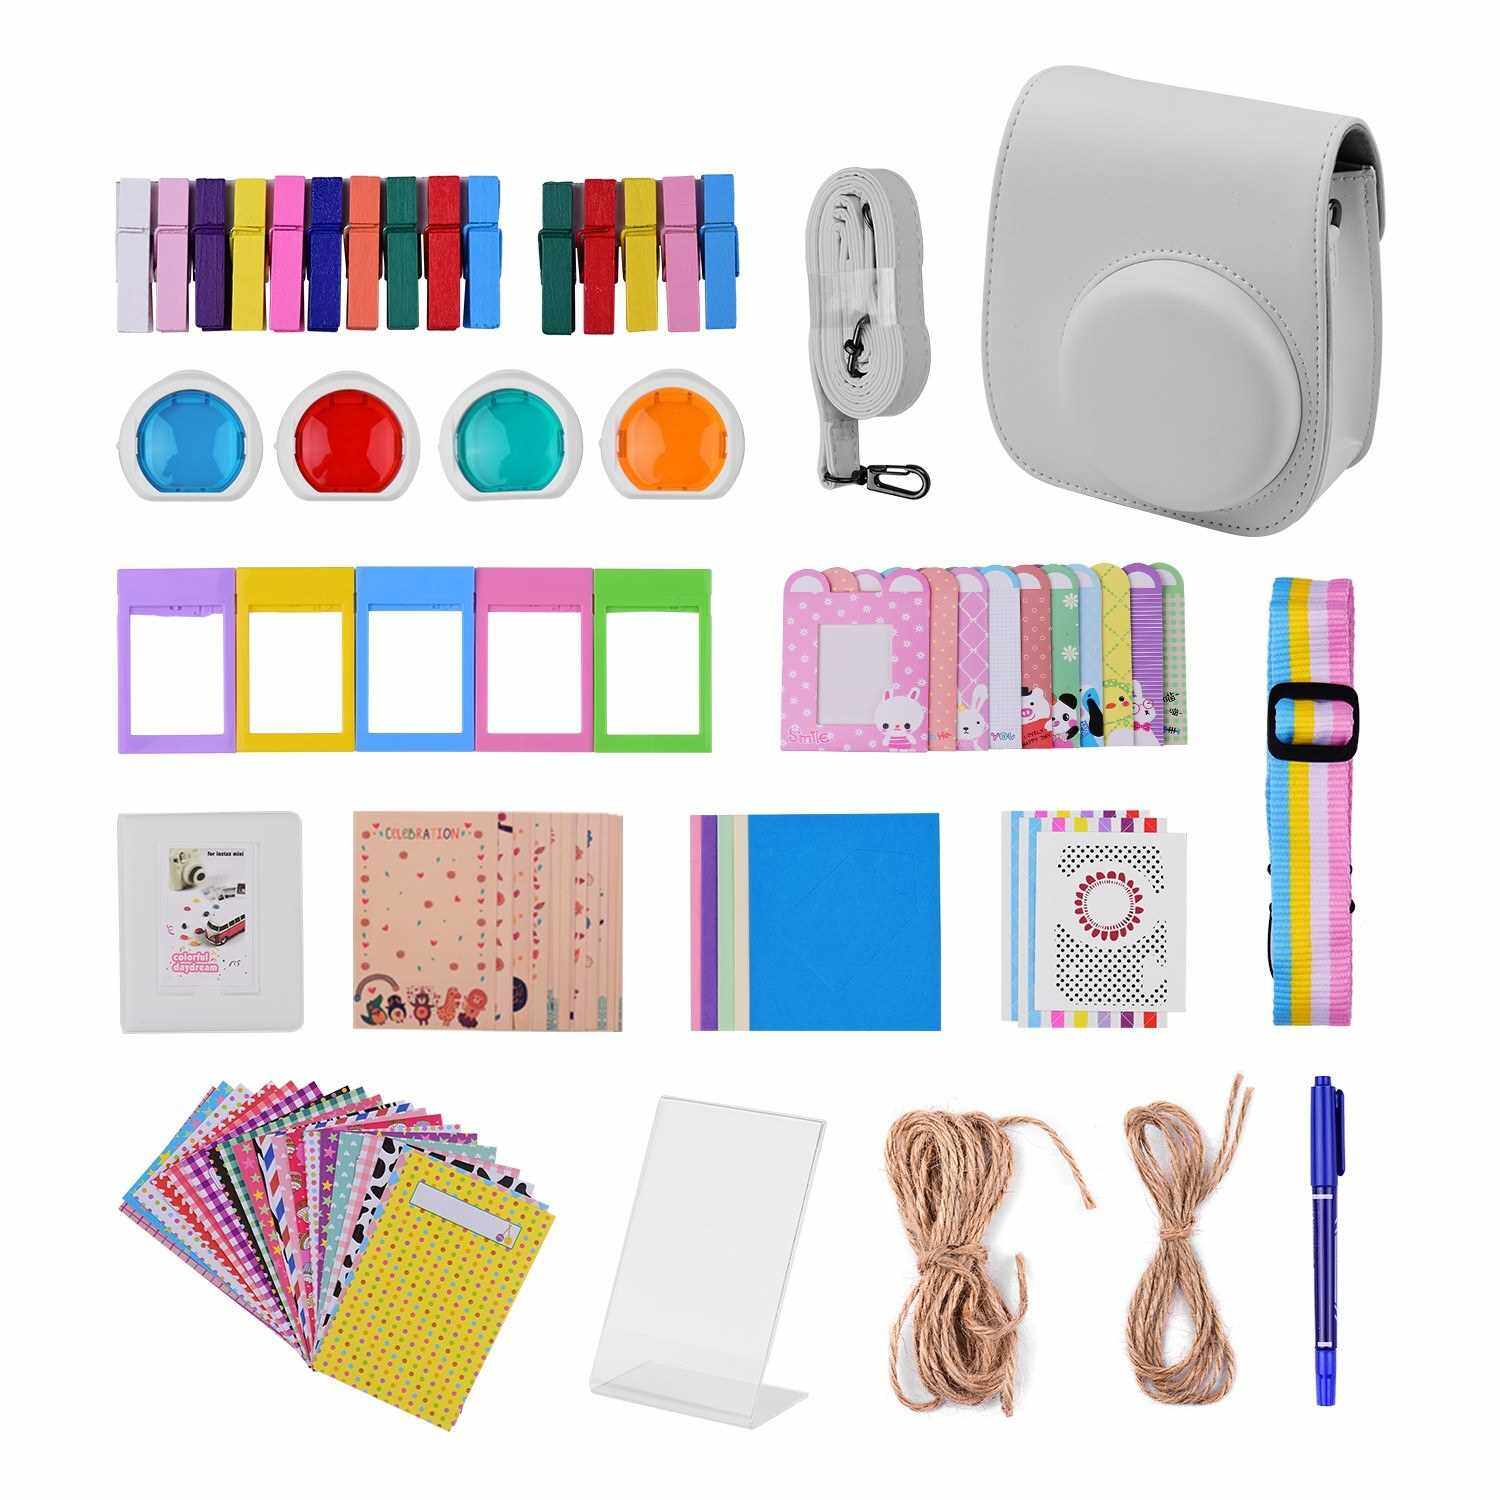 12-in-1 Instant Camera Accessories Bundle Kit Compatible with Fujifilm Instax Mini 11 Including Camera Bag/Camera Strap/Photo Album/Photo Clips/Photo Frame/Hanging String/Stickers/Pen/Filters (White)